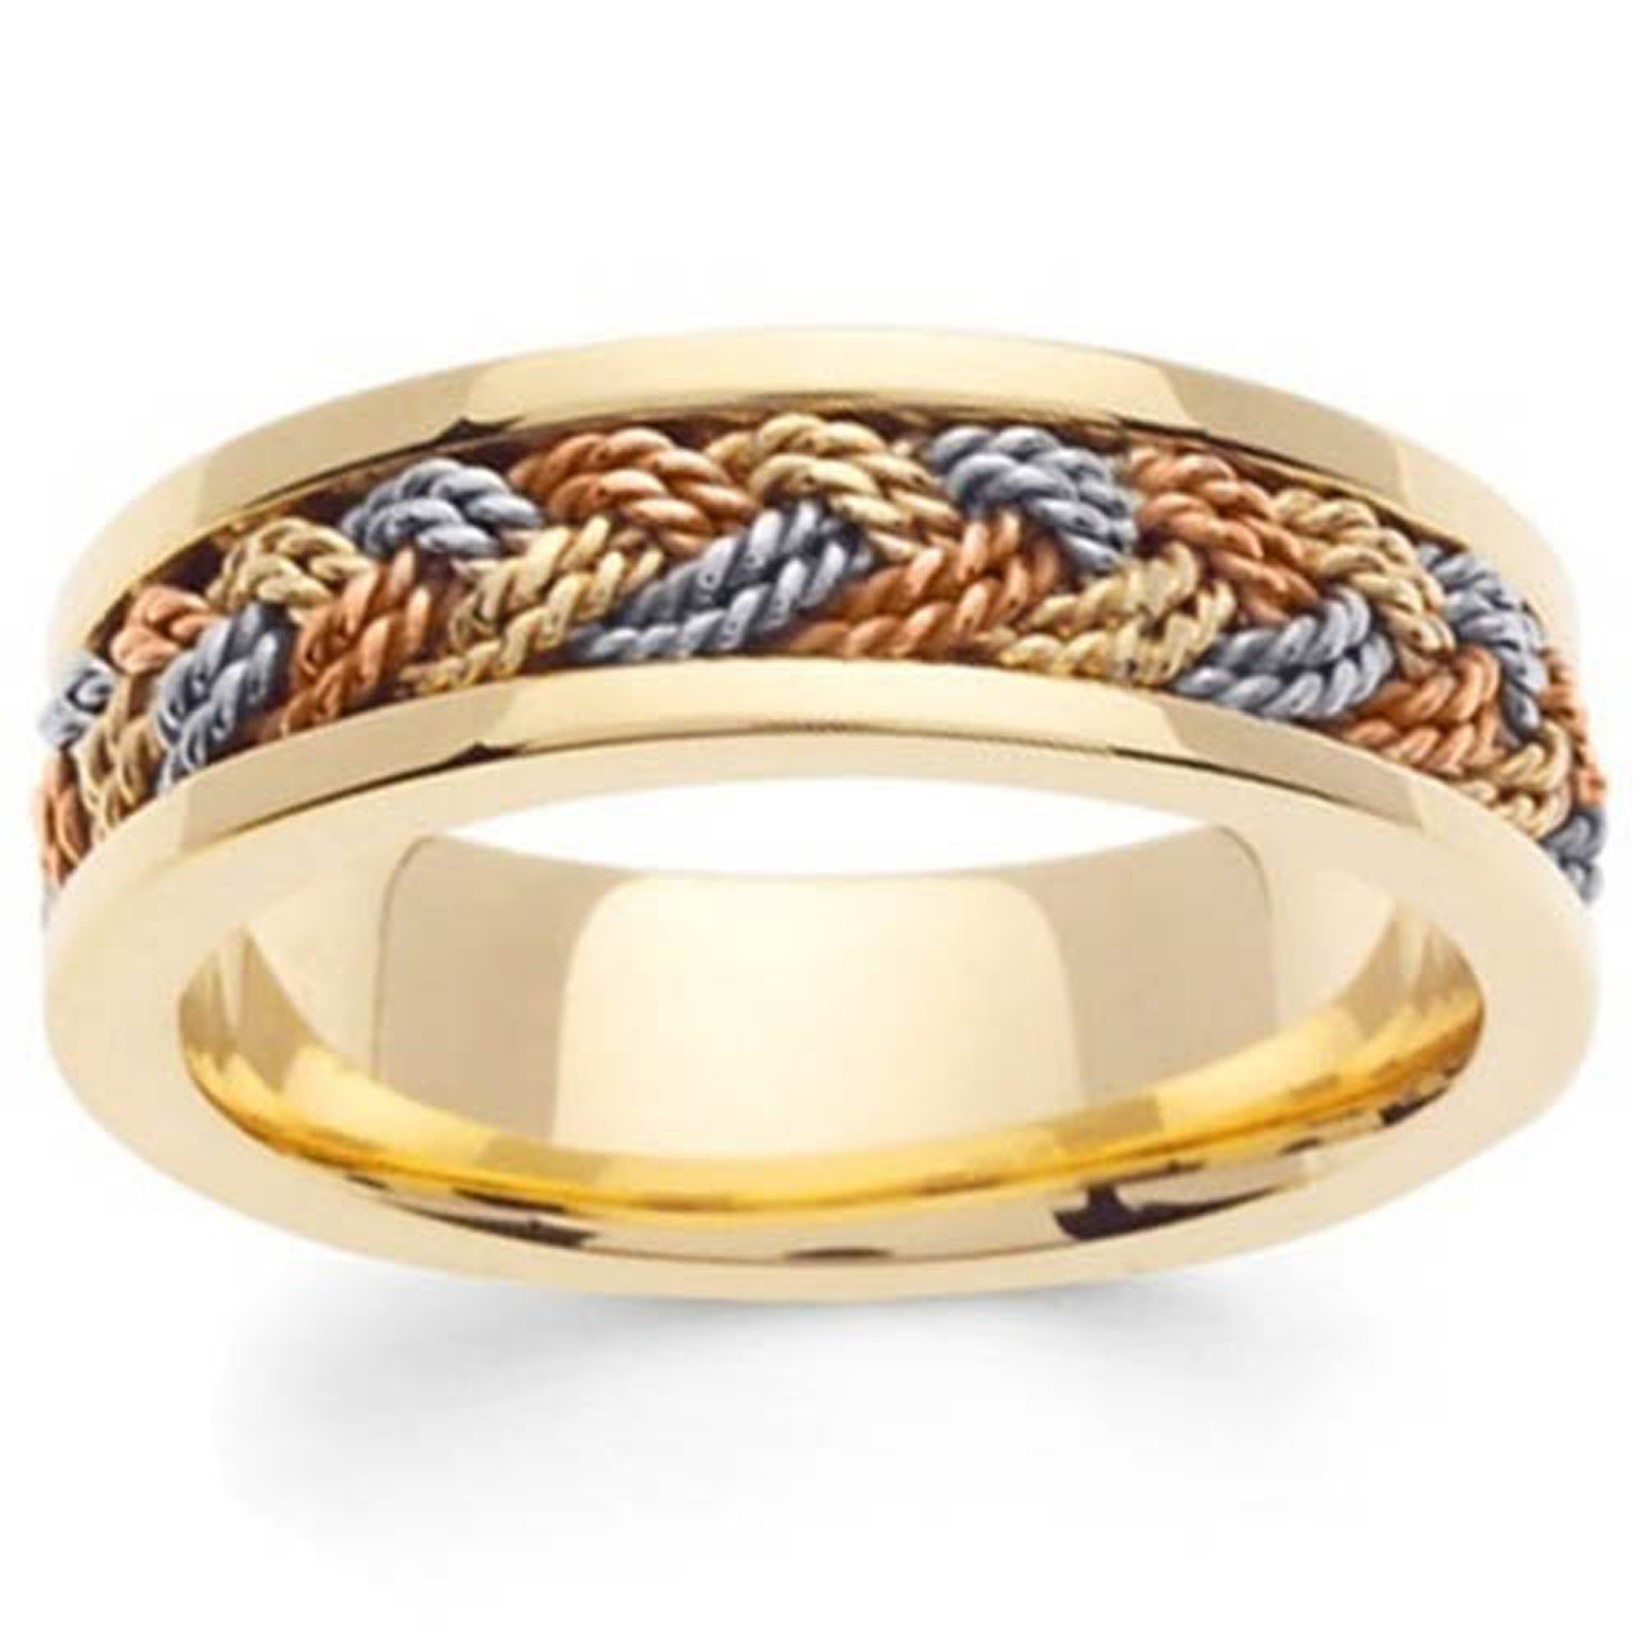 Men's Yellow IP Ring with Tricolor Braid - Jewelry - Rings